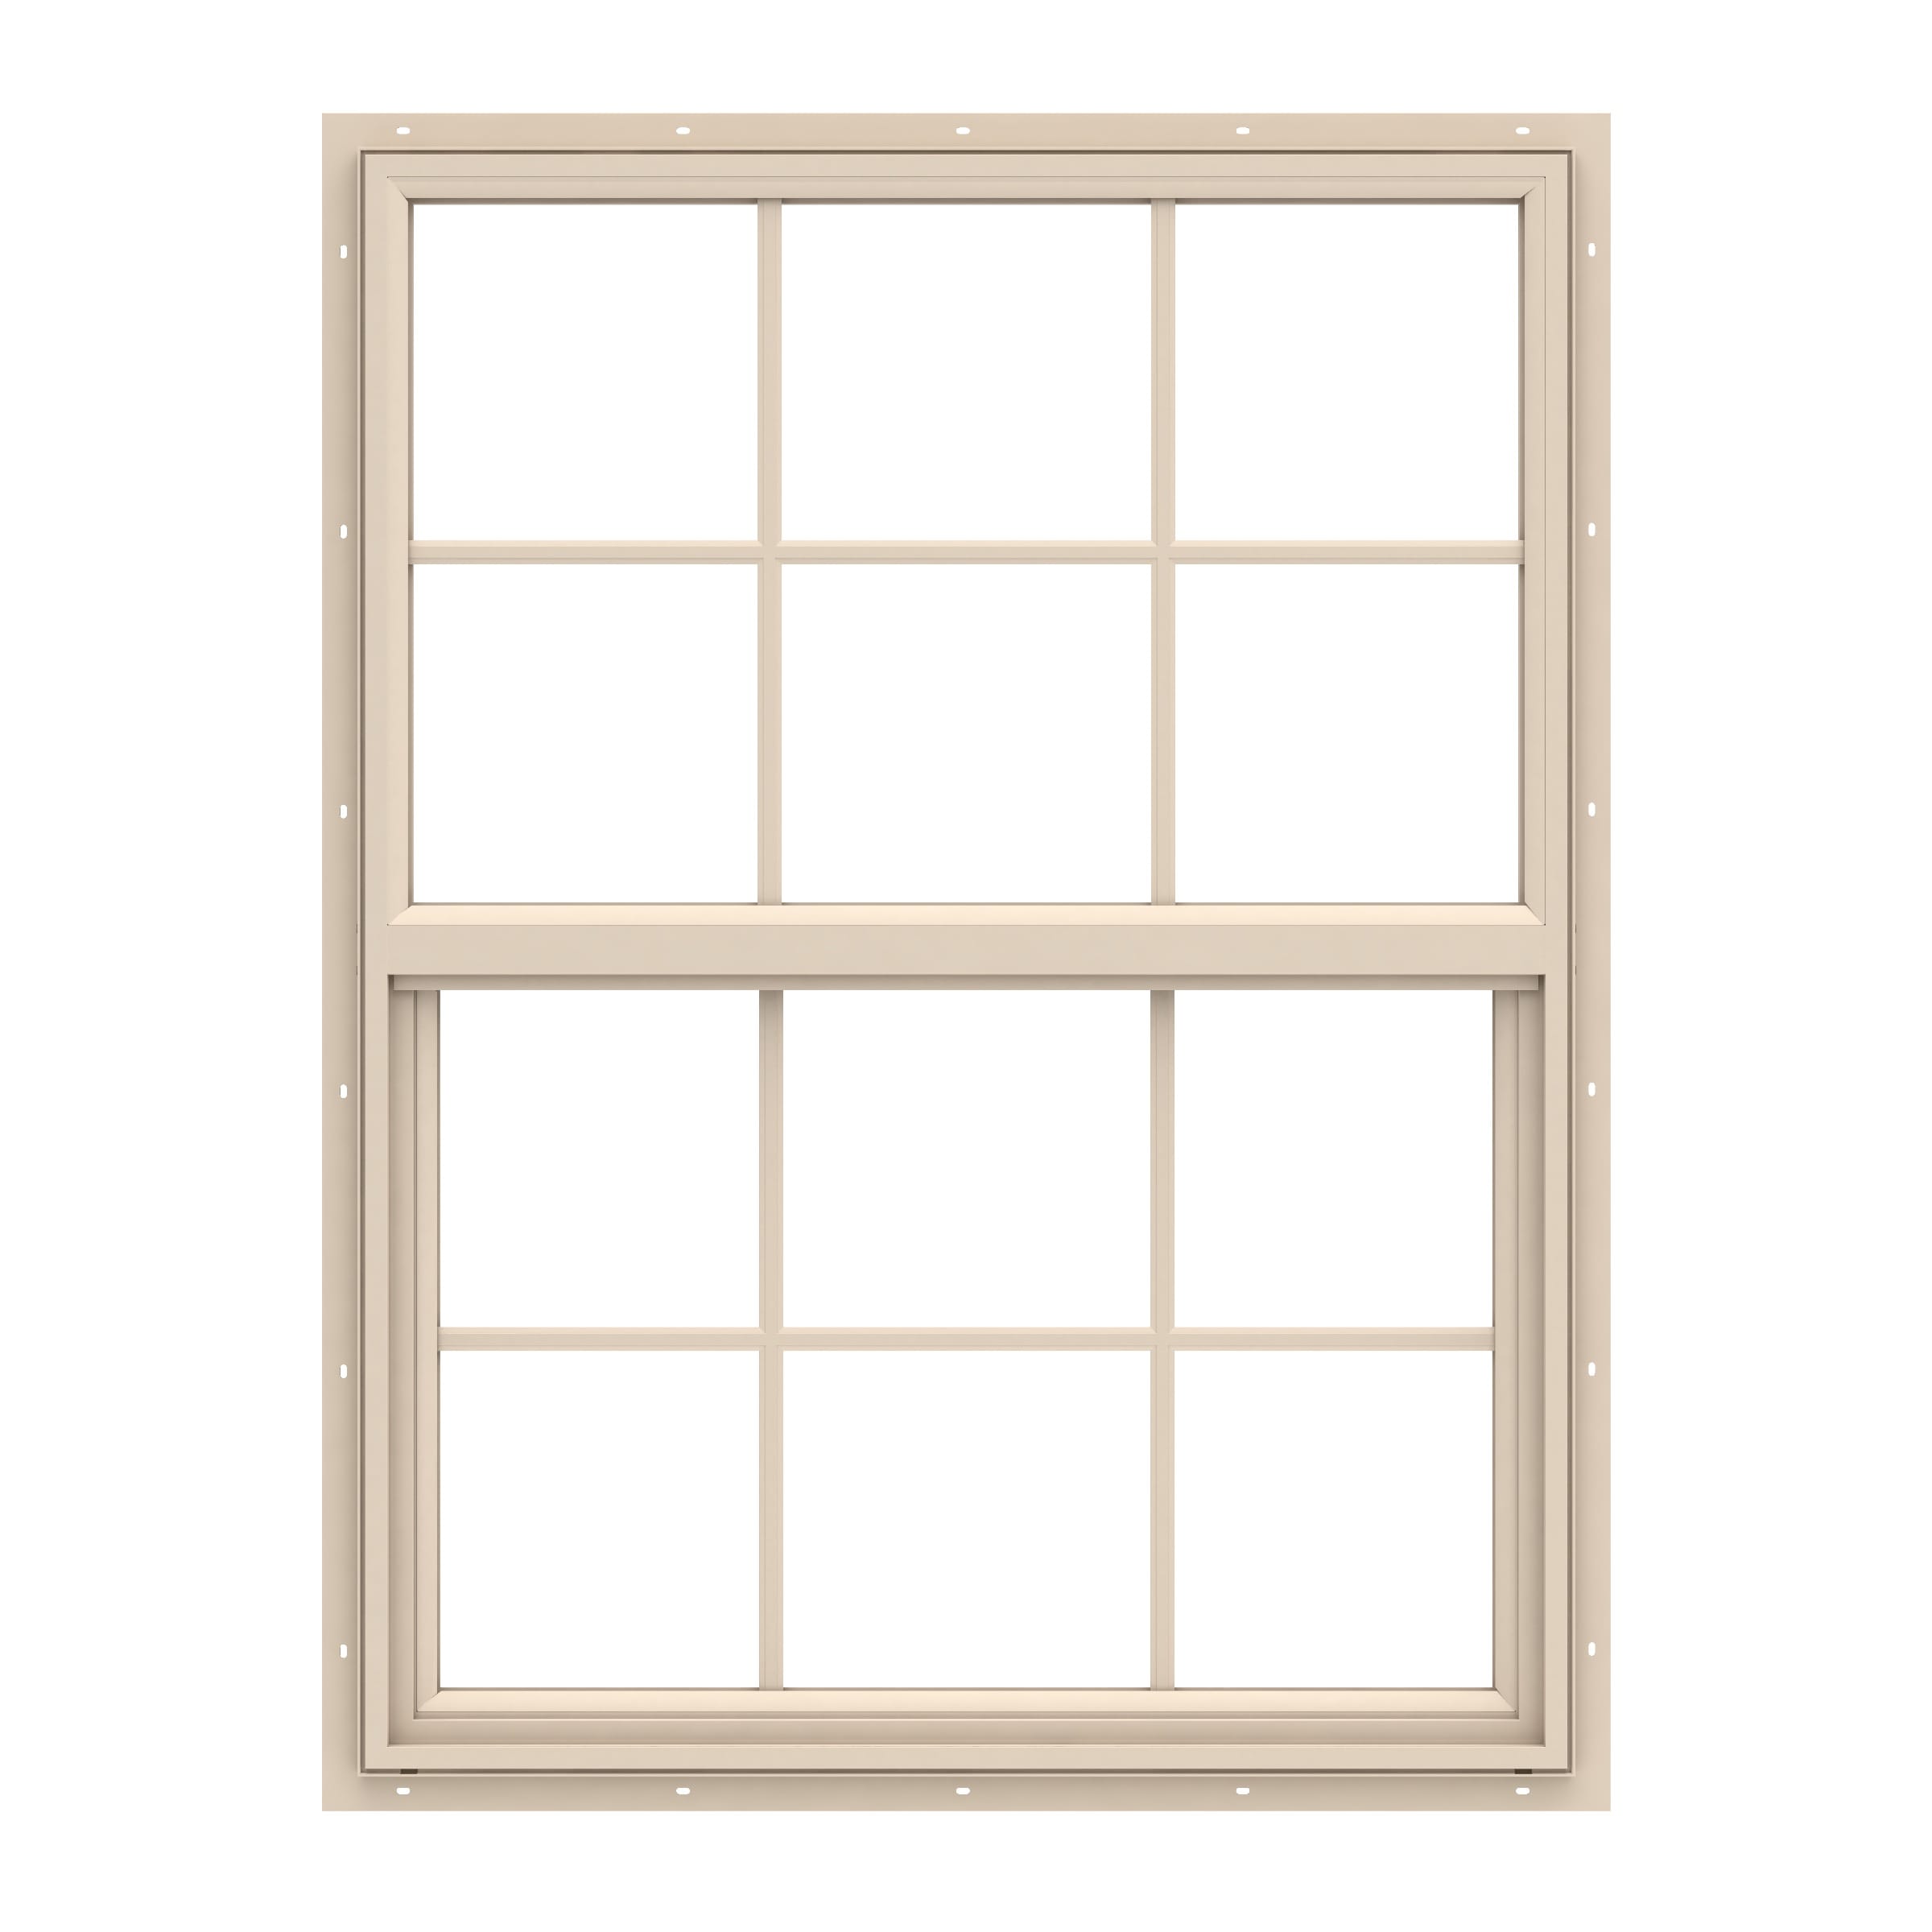 Pella 150 Series West New Construction 23.5-in x 35.5-in x 2.6875-in Jamb Almond Vinyl Low-e Argon Single Hung Window with Grids Half Screen Included -  1000011570